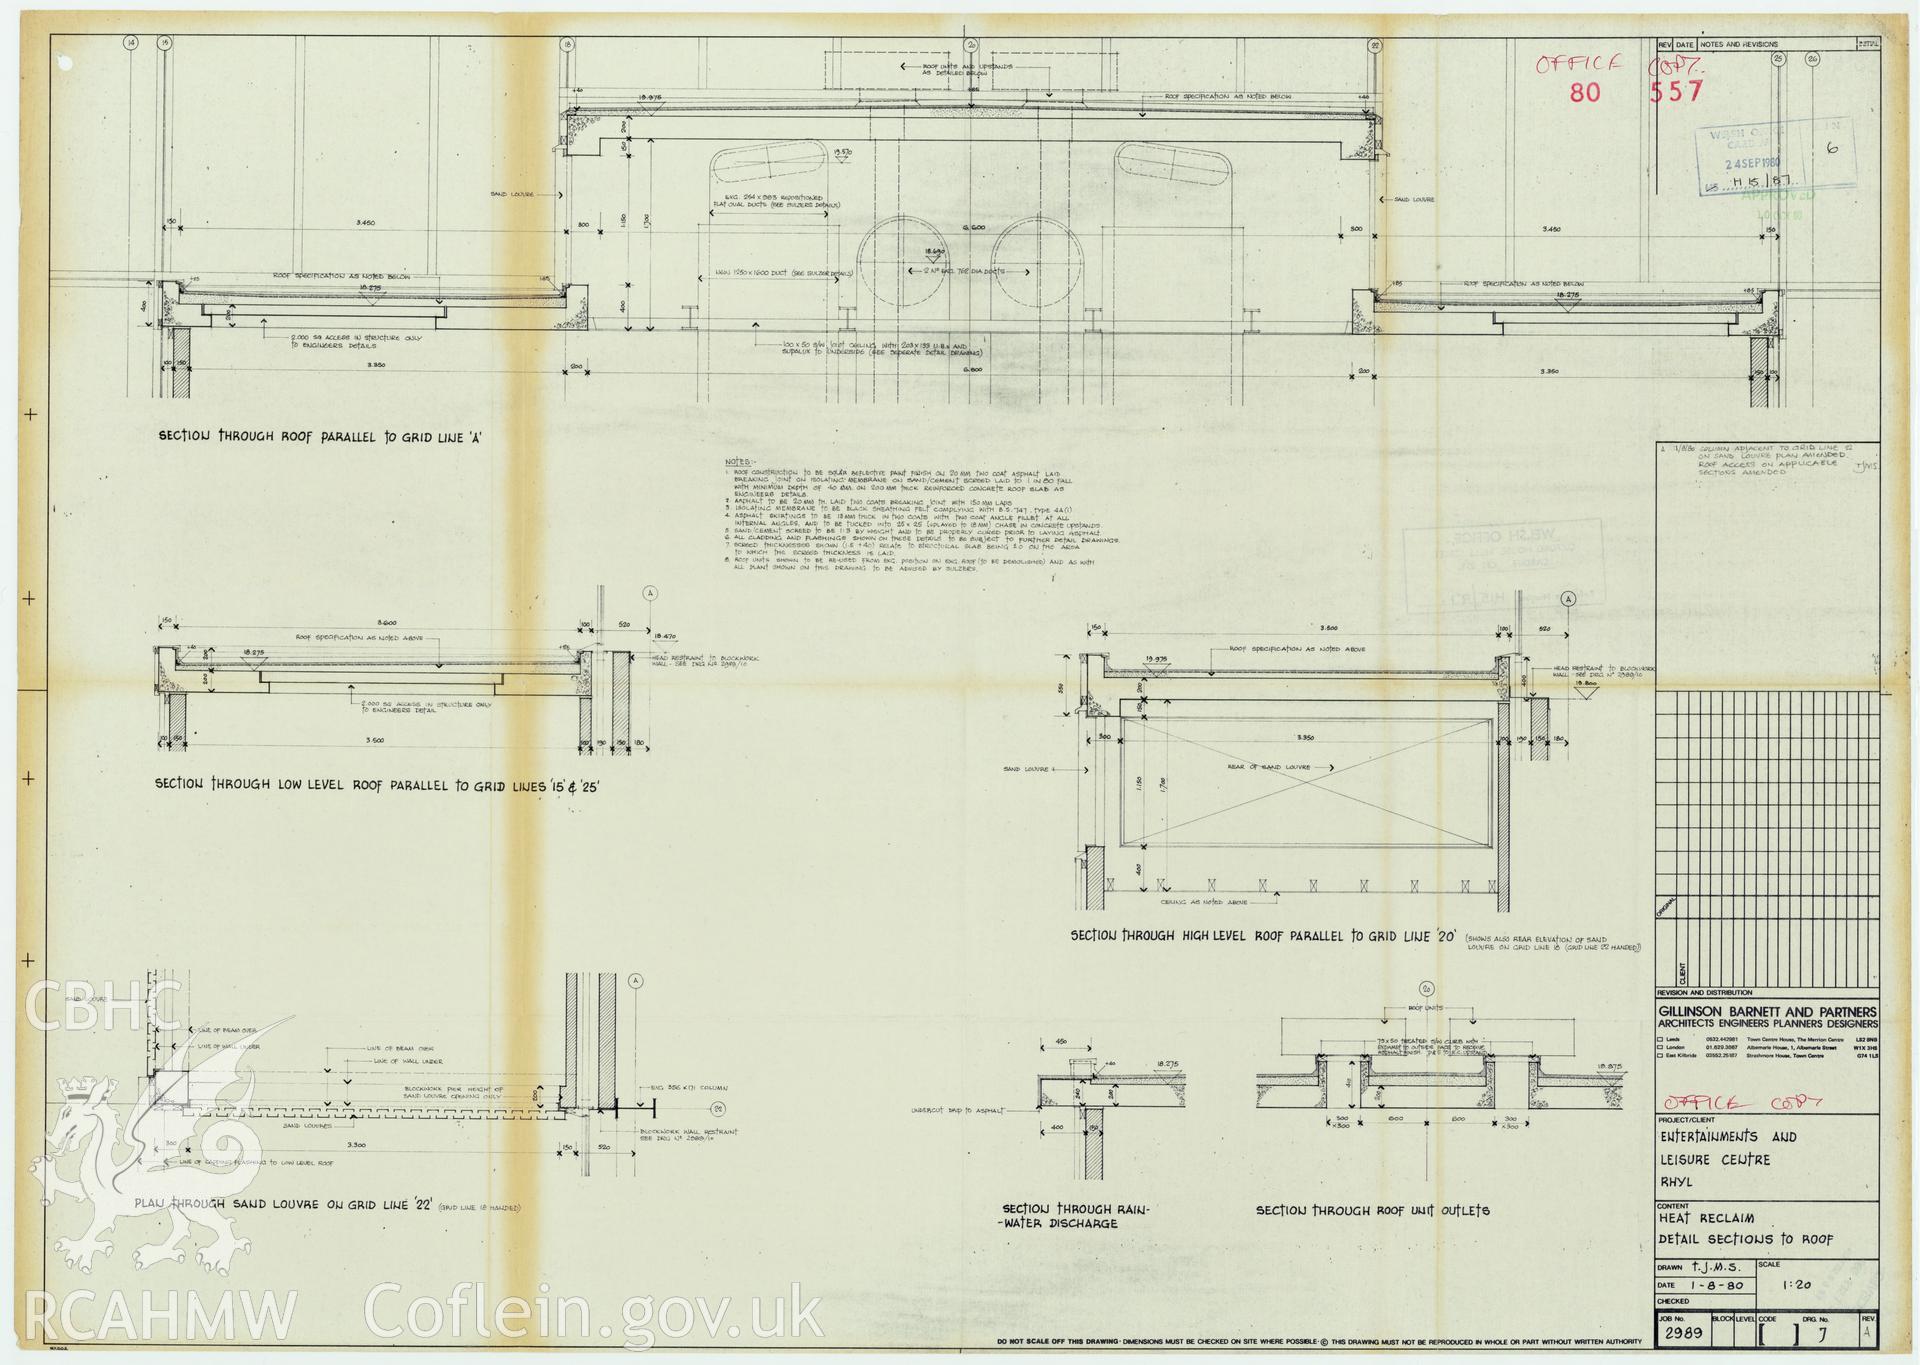 Digital copy of a measured drawing showing heat reclamation details sections to the roof of the entertainment complex at Rhyl Sun Centre and Theatre, produced by Gillinson Barnett & Partners  1980. Loaned for copying by Denbighshire County Council.